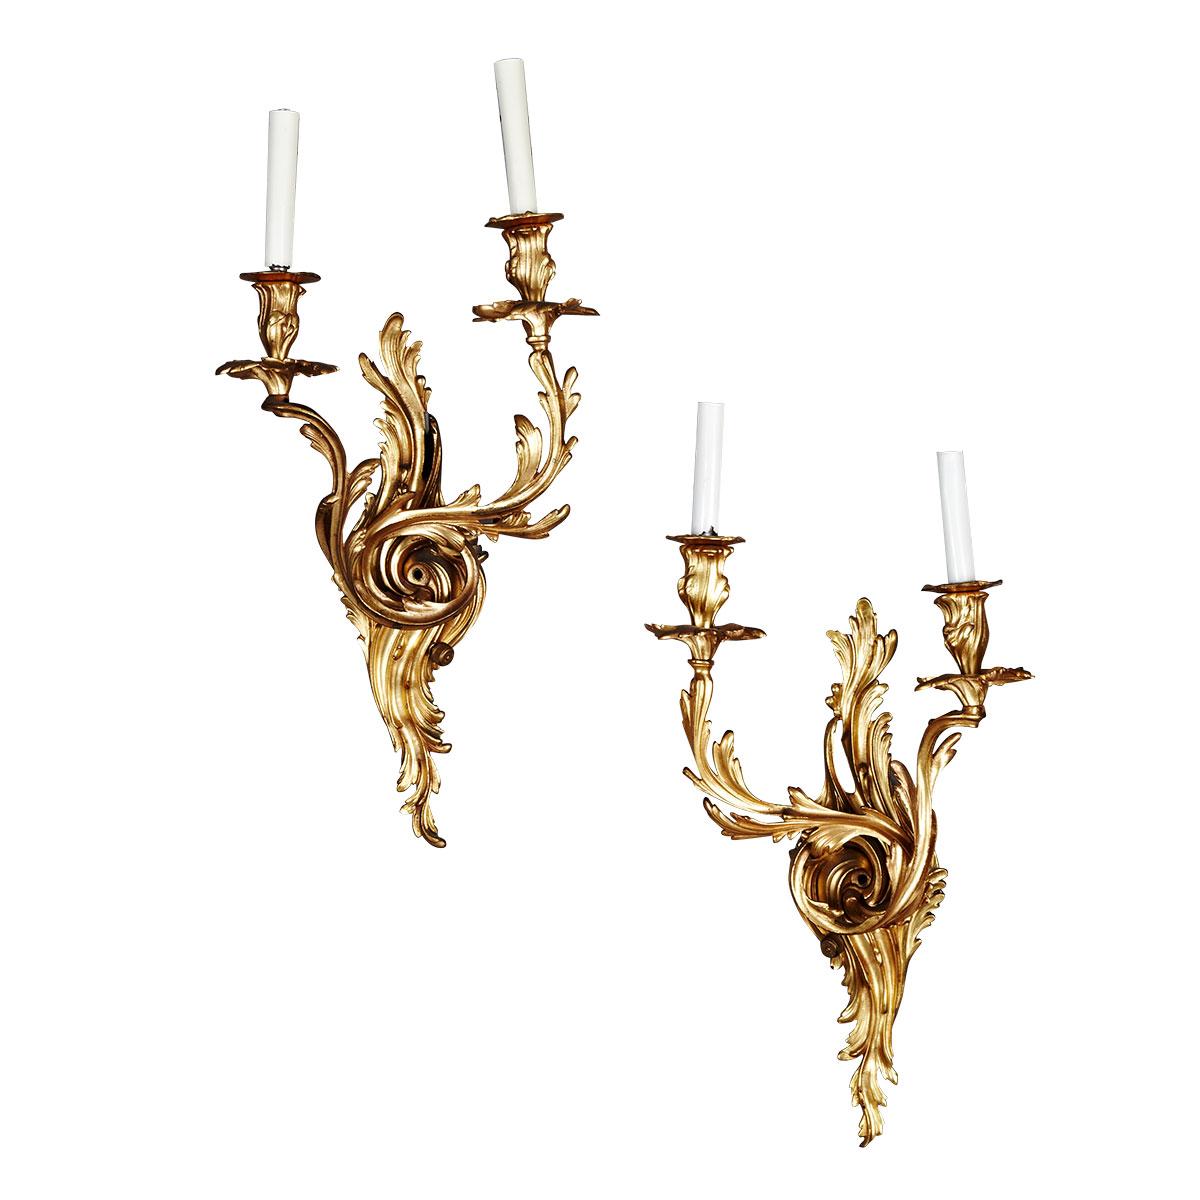 Pair of Louis XV Style Gilt Bronze Two Light Wall Sconces, early 20th century